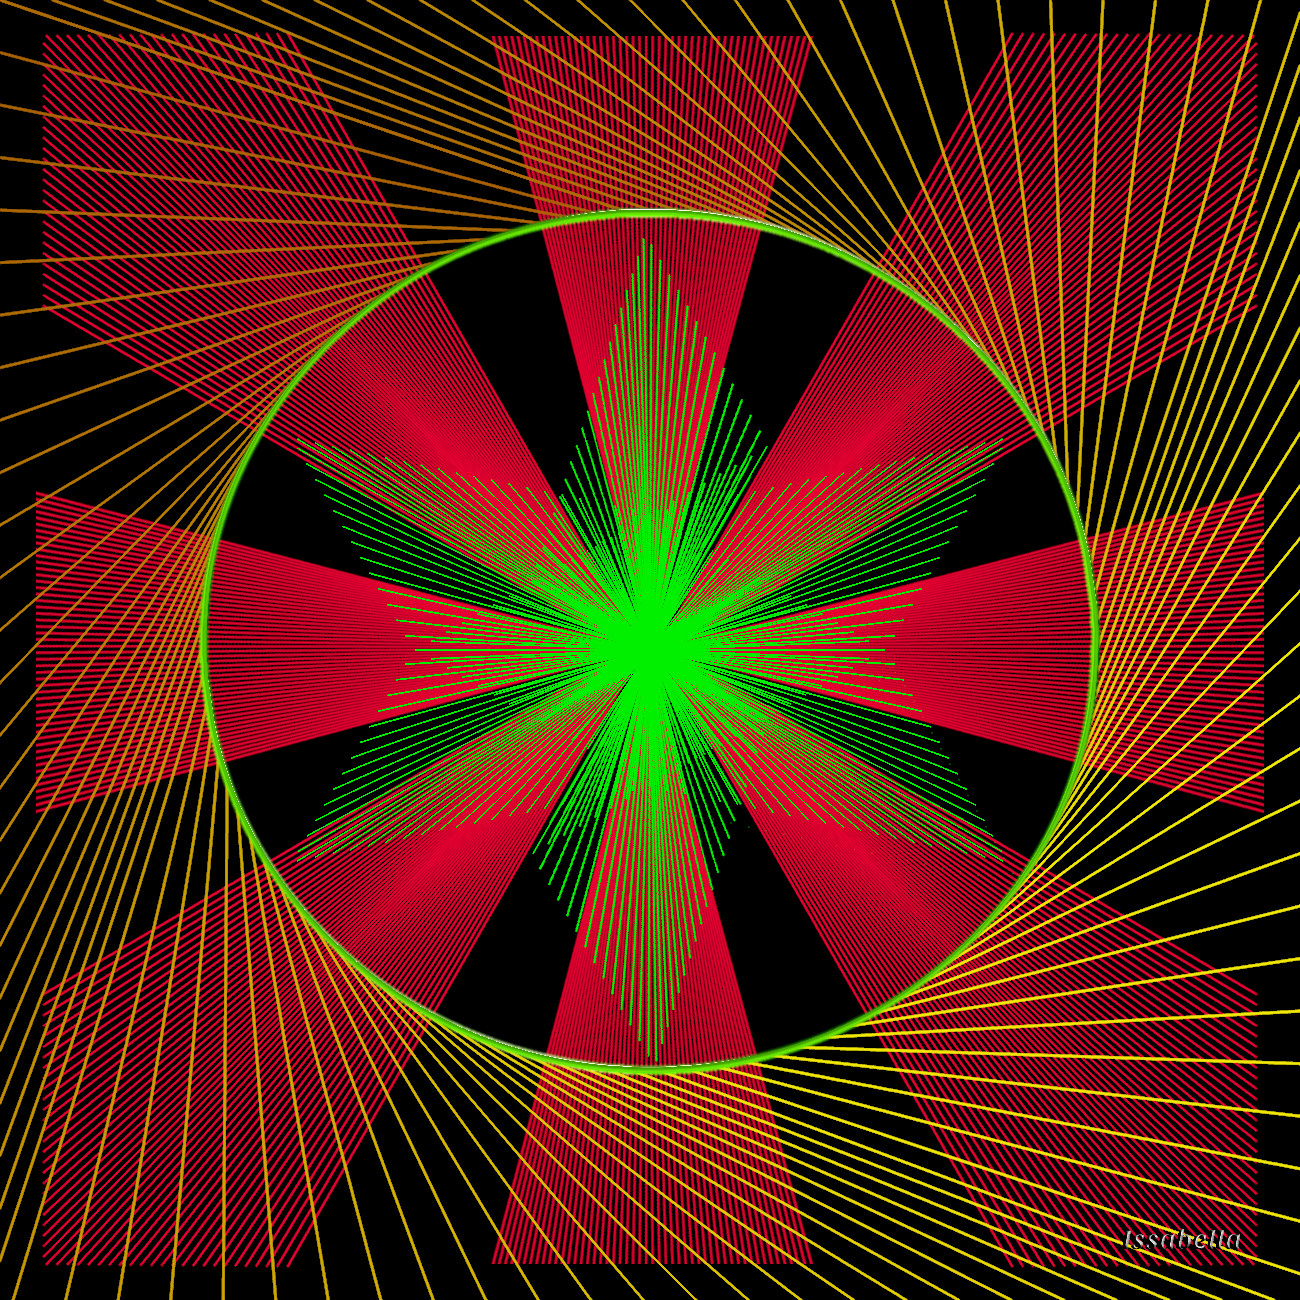 Creation in red_with lined paths_Tin.jpg